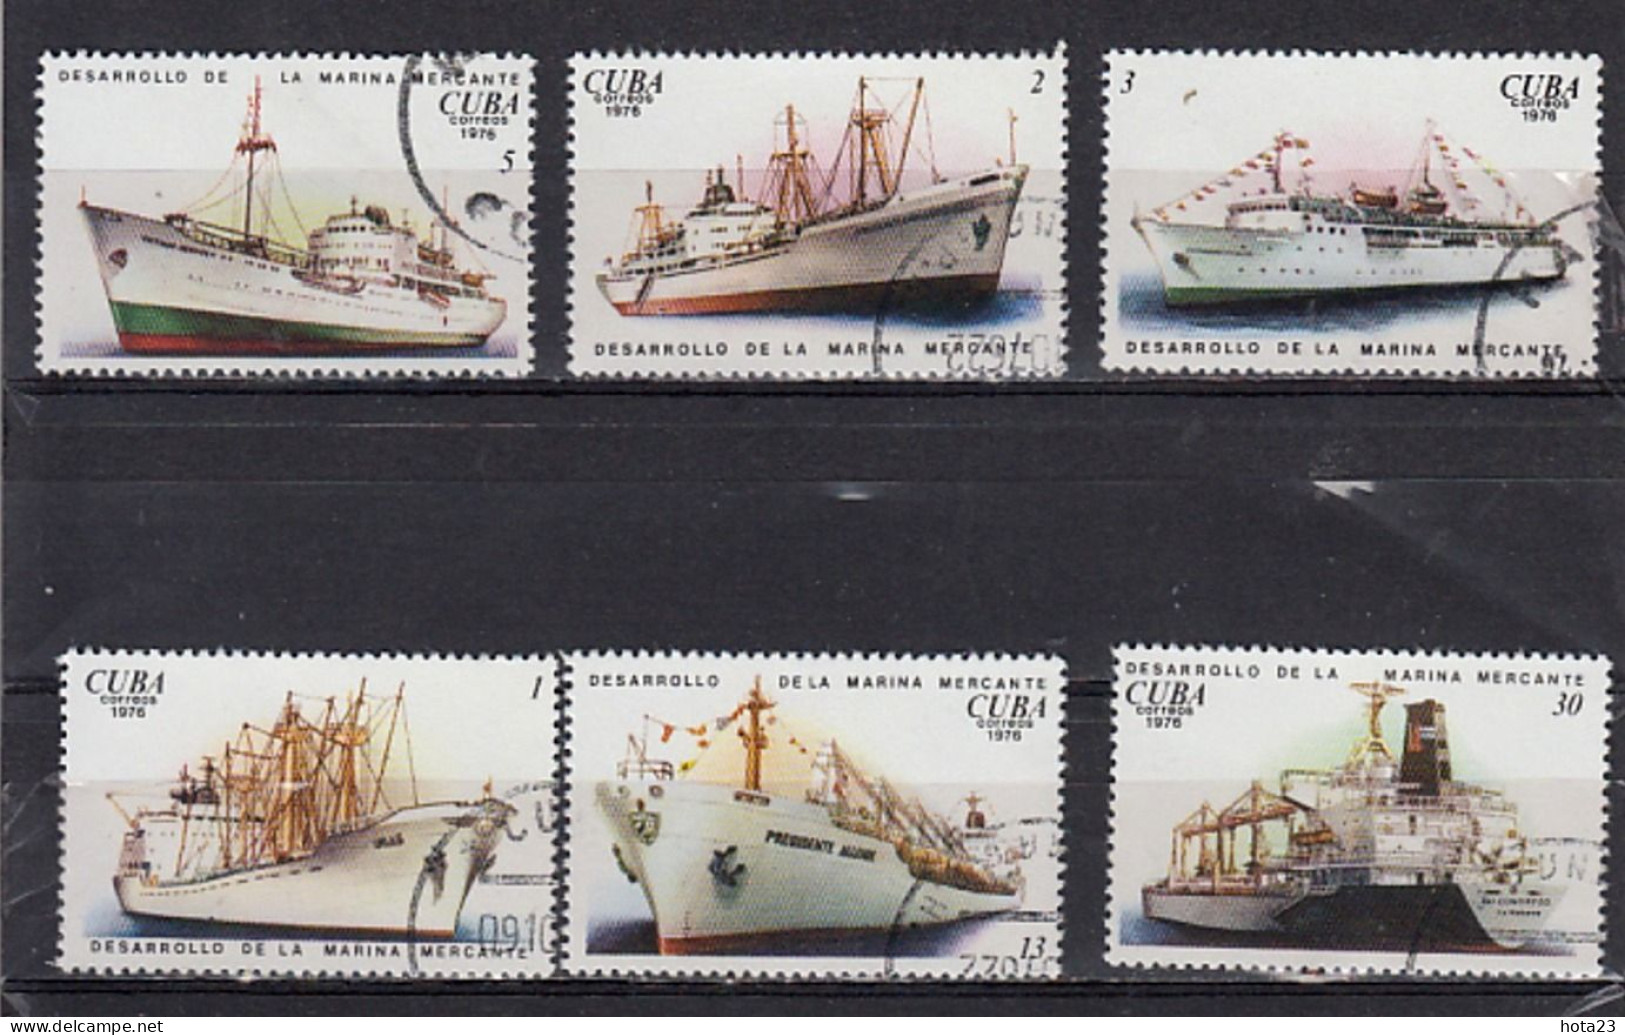 Cuba Caribbean Island 1976 -Cargo And Passenger Sips Complete Set. Mi ## 2162-2167  Used / Cto - Used Stamps